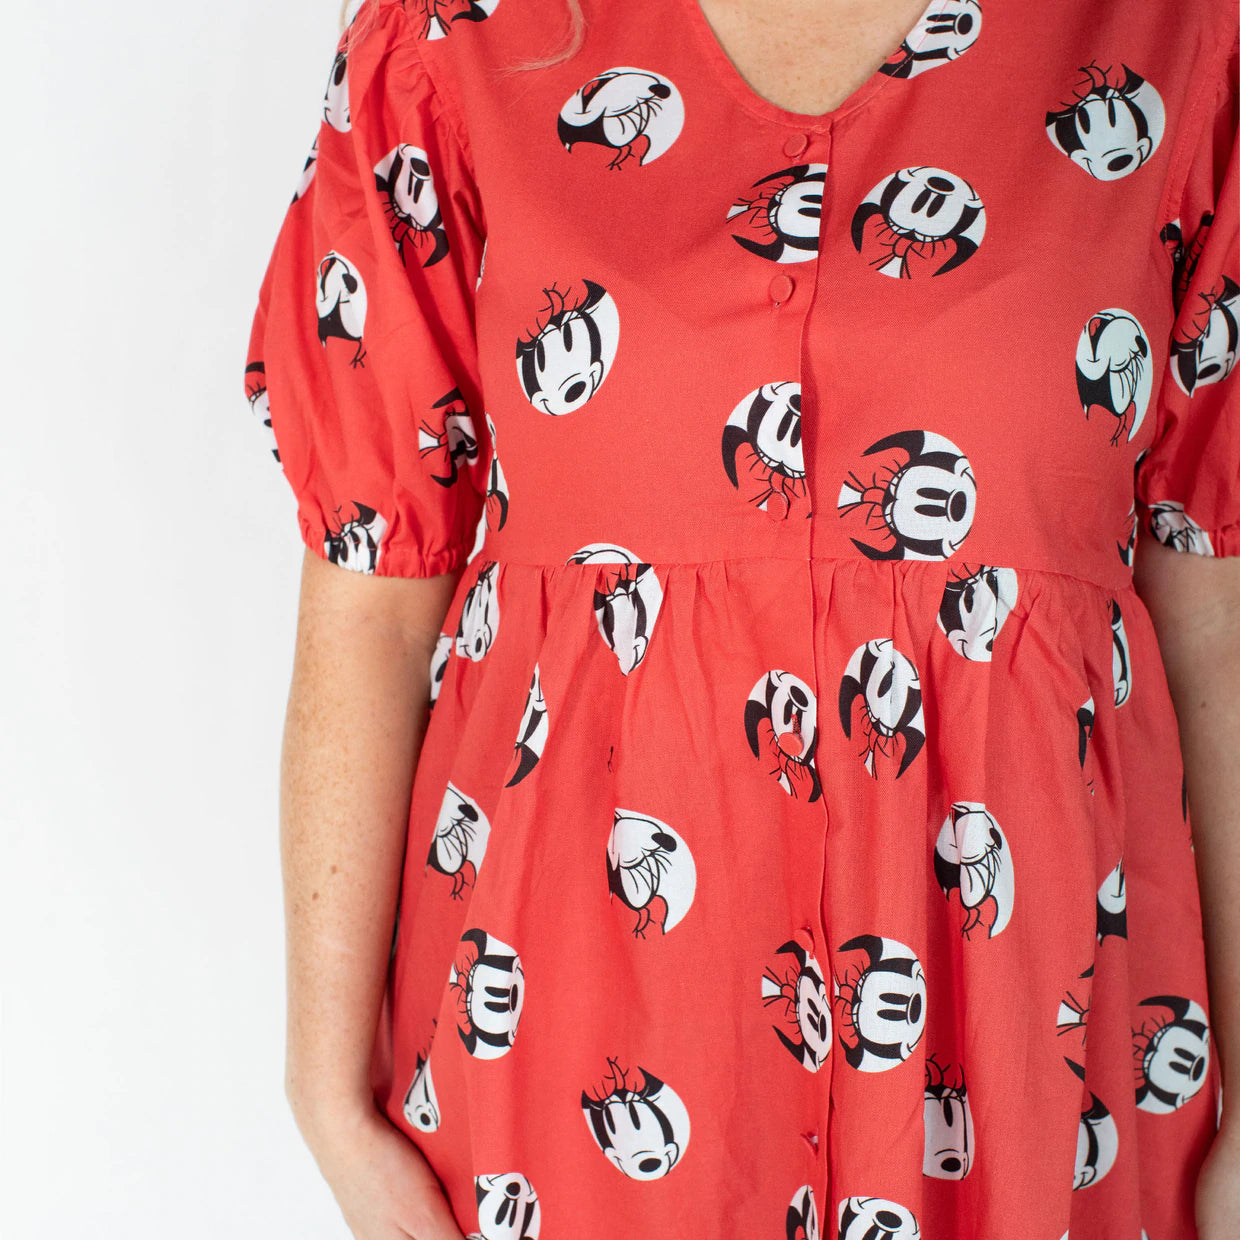 Minnie Mouse (Disney) Puffy Sleeve Button-Up Dress by Cakeworthy